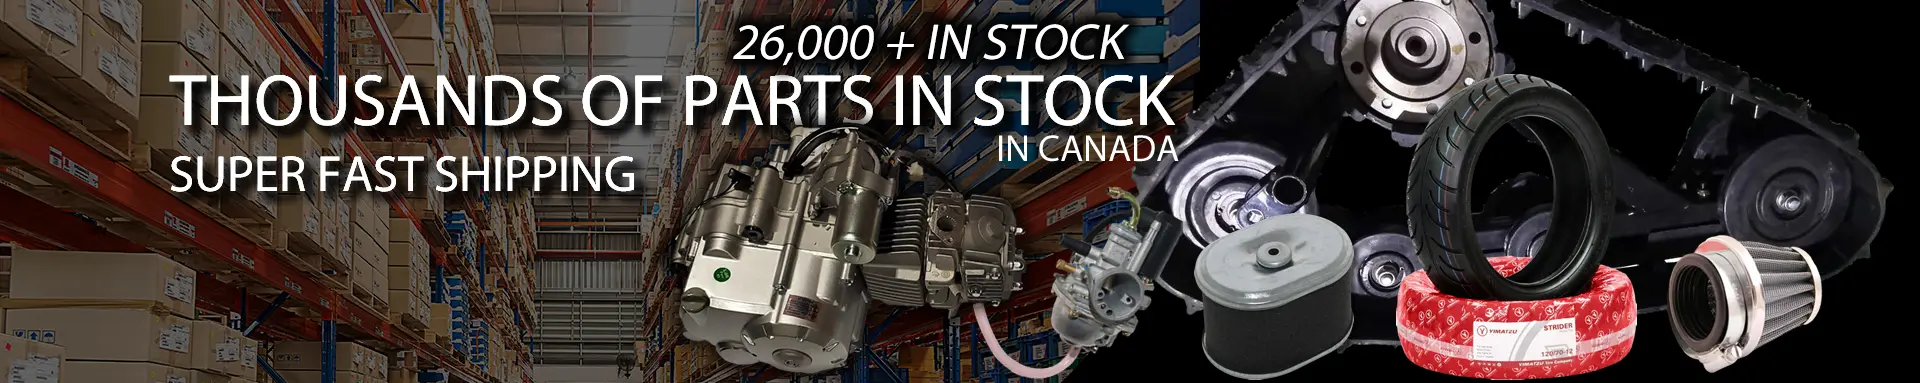 We have Thousands of parts in stock in Canada